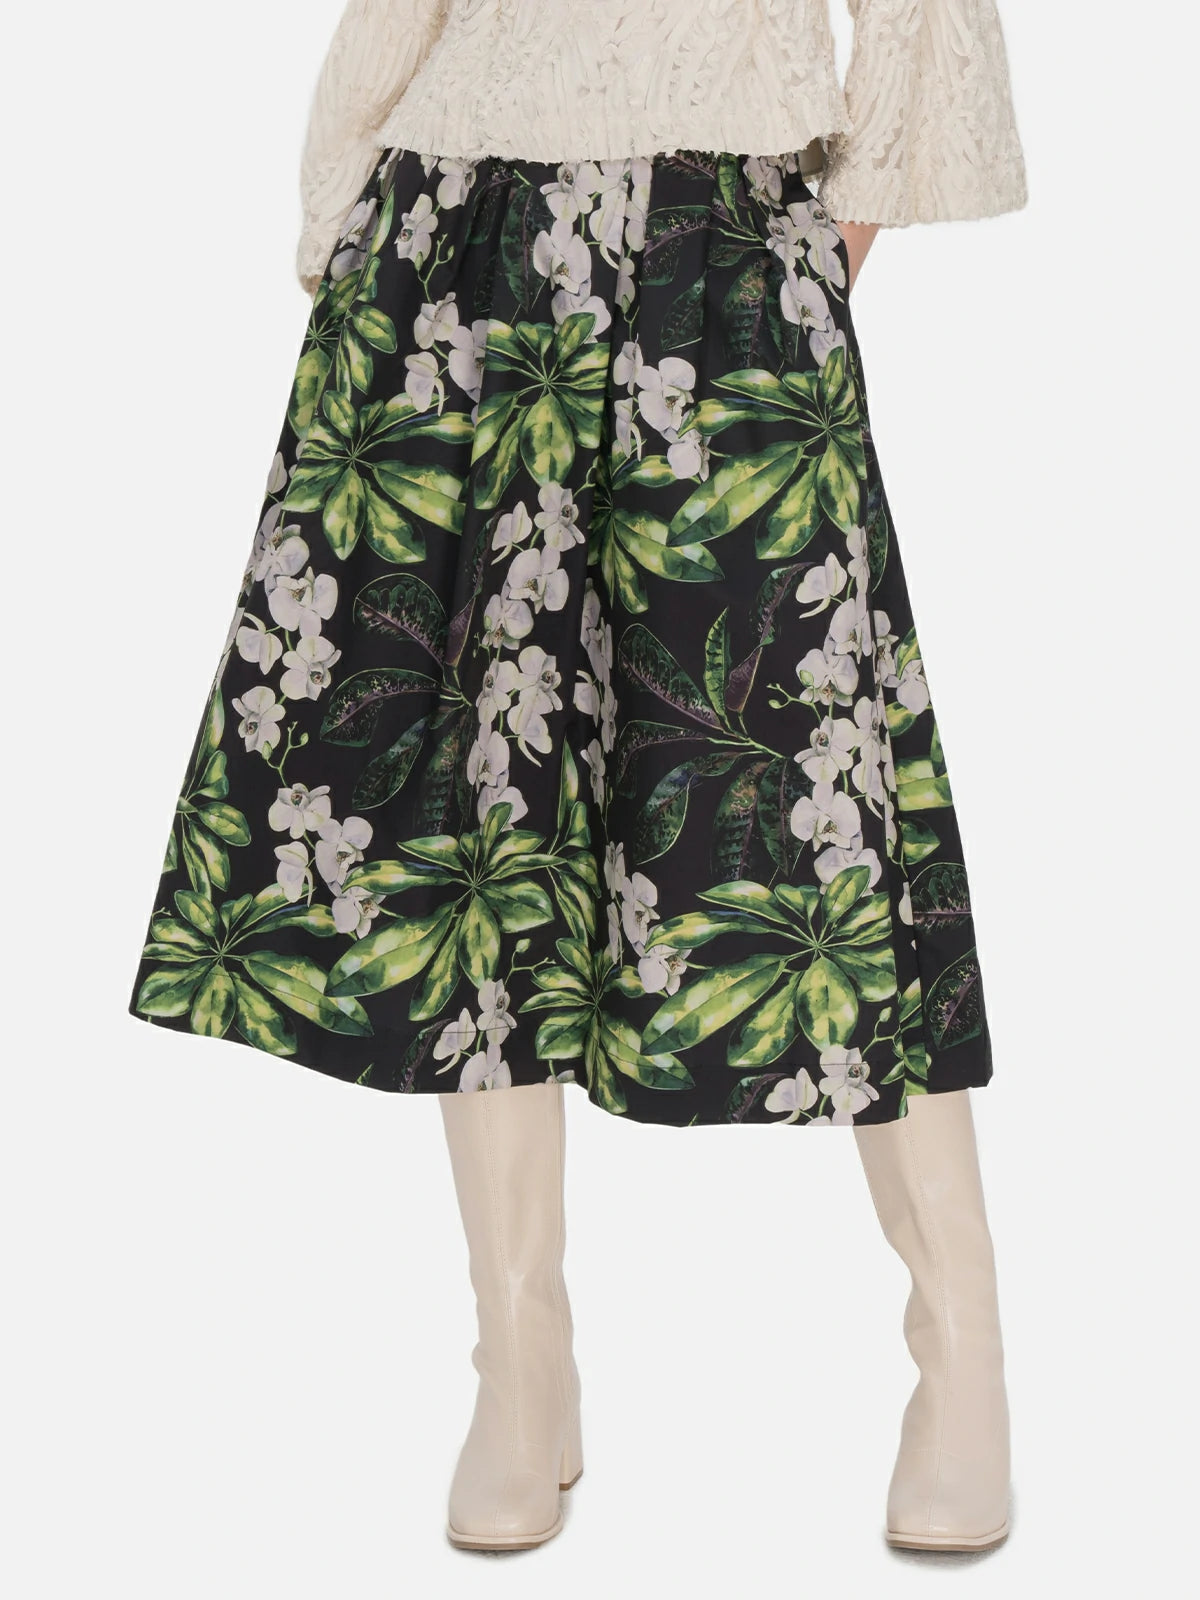 Tailored high-waisted A-line midi skirt adorned with a fresh color-blocked floral pattern and layered pleats, offering both a stylish and comfortable fit.